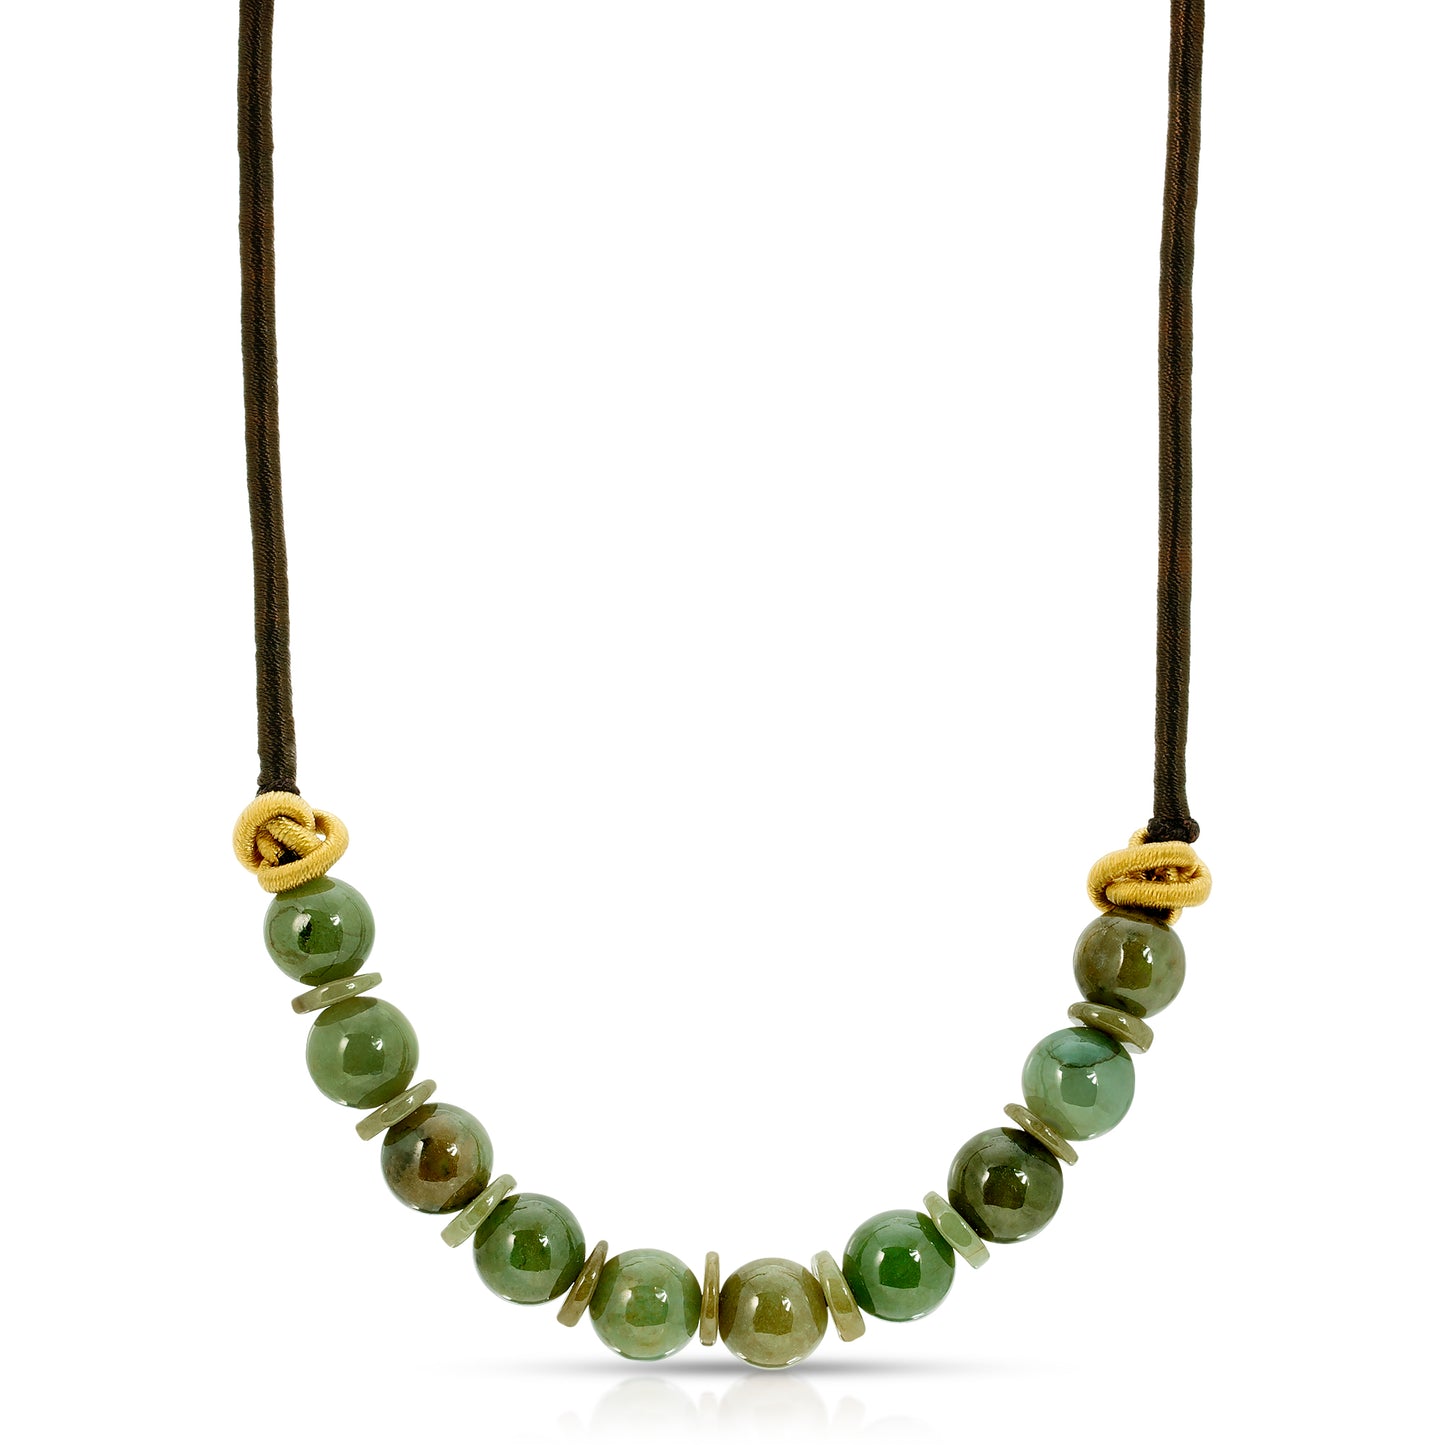 Get Closer to Nature with the PI Symbol and Jade Beads Necklace made with Brown Cord